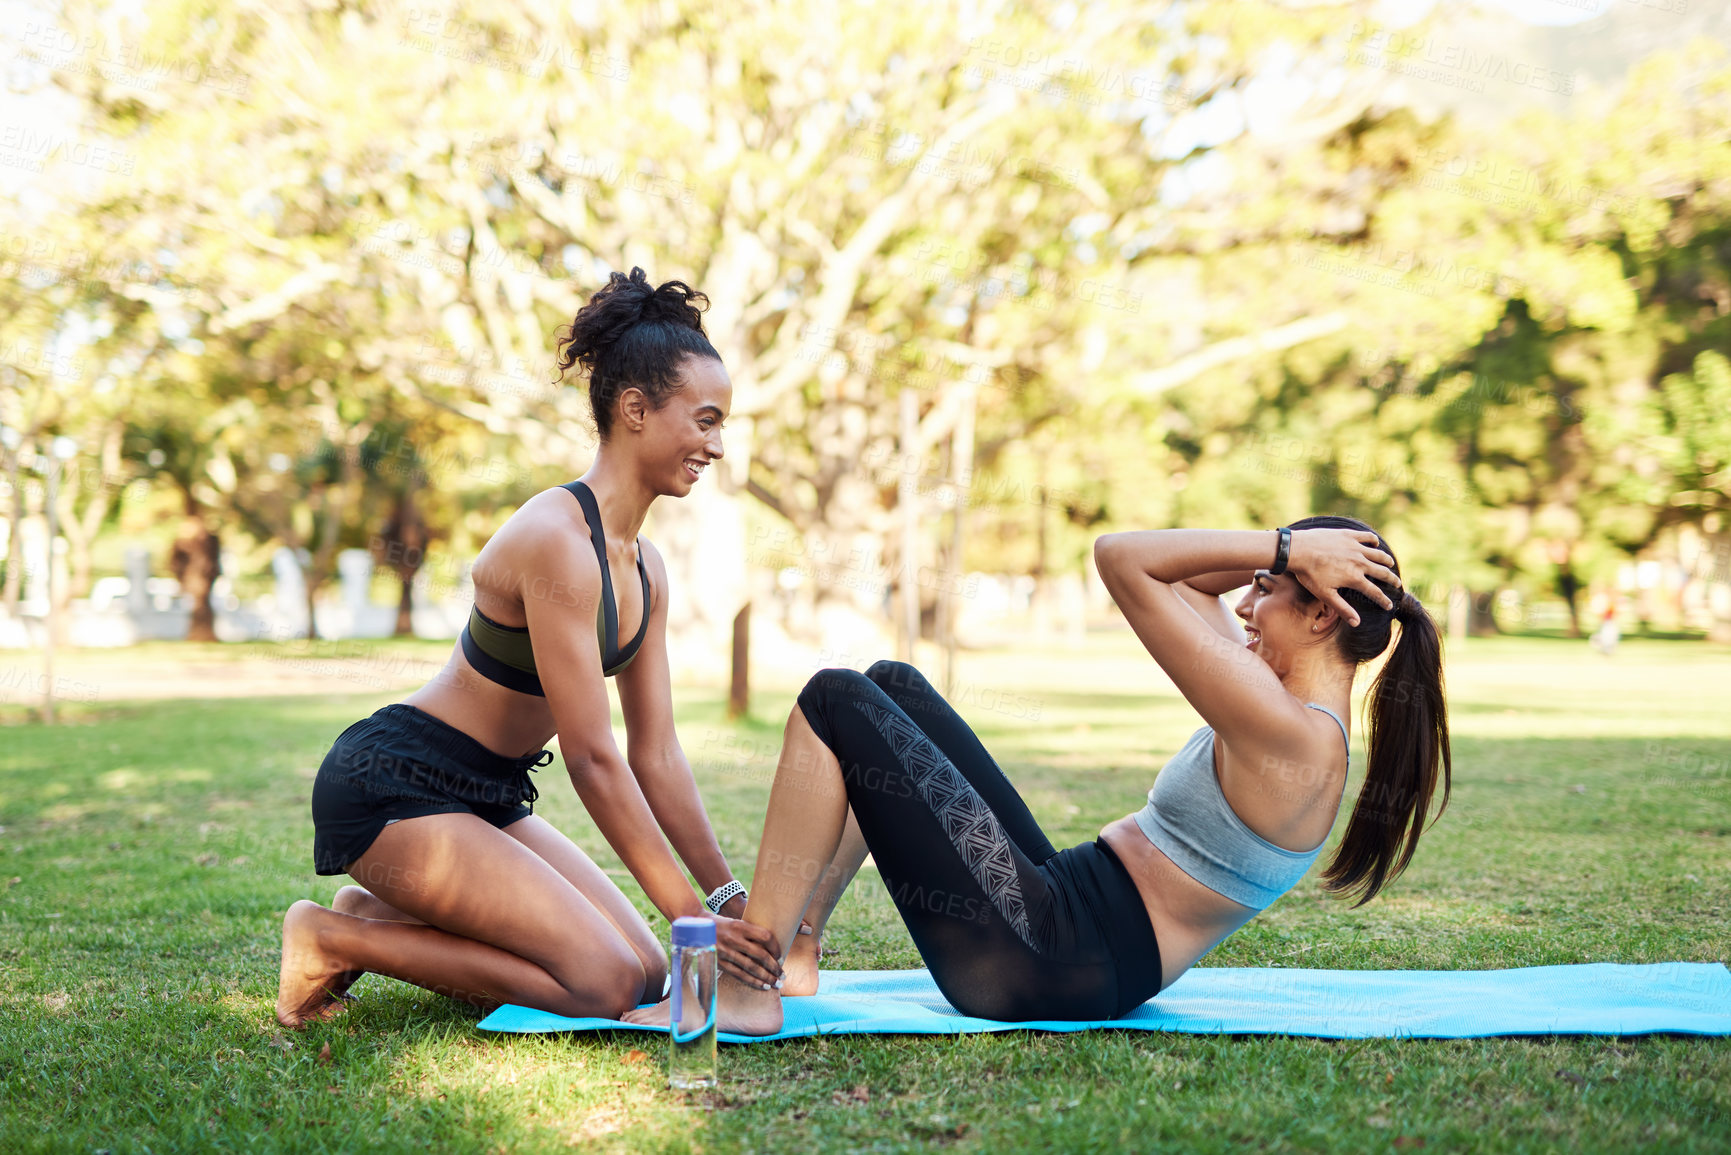 Buy stock photo Full length shot of two attractive young women sitting and performing core exercises while in the park during the day